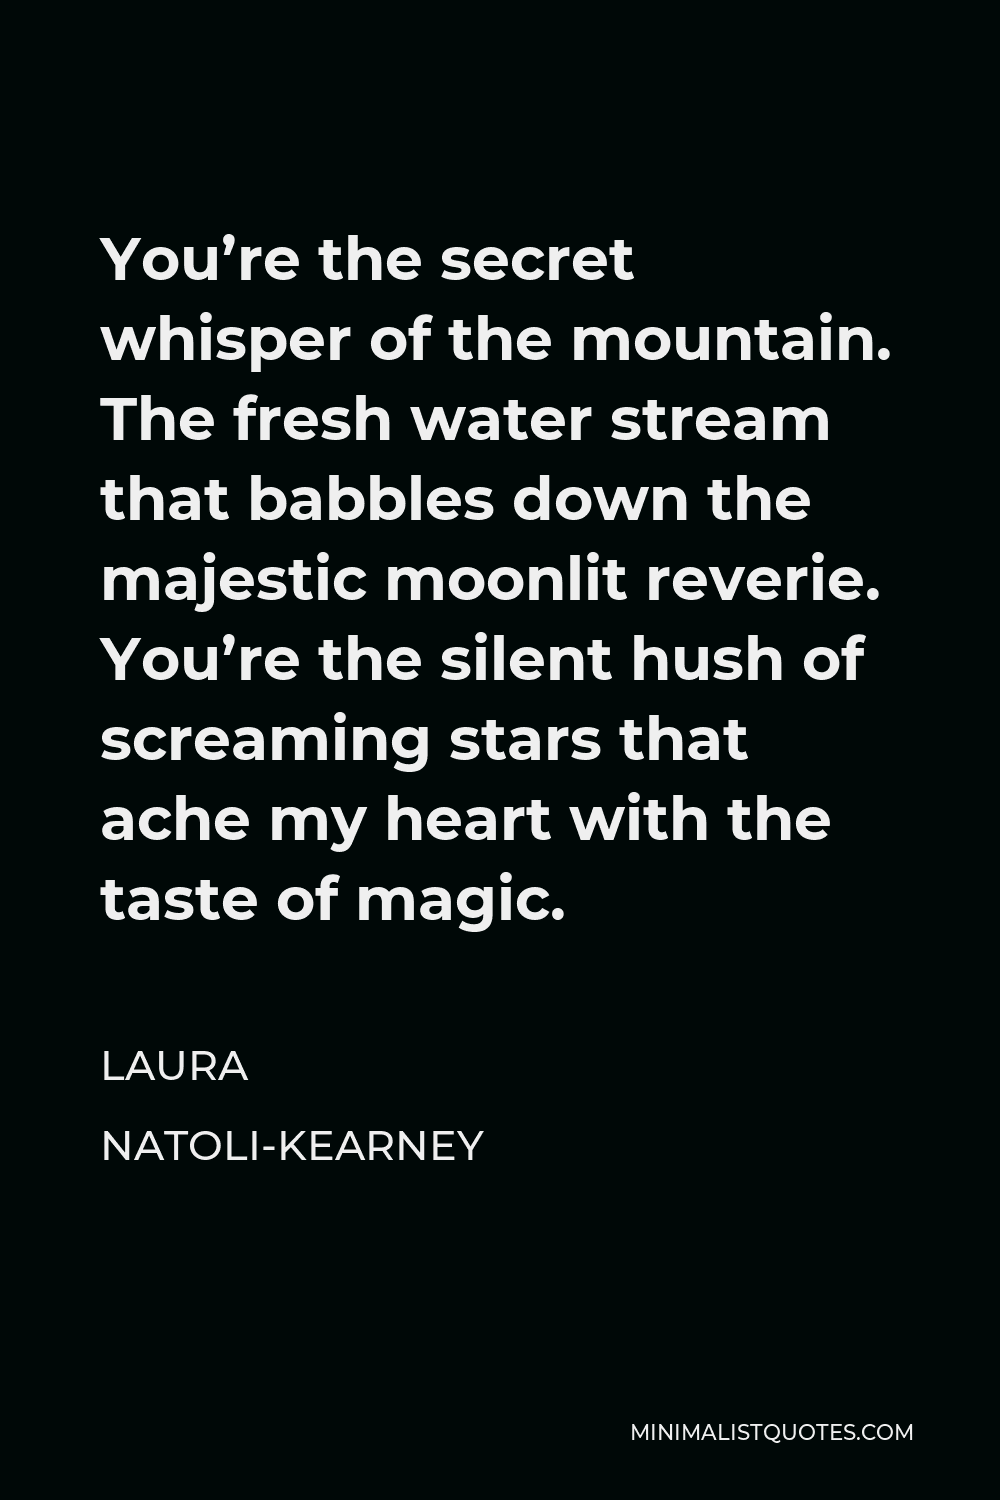 Laura Natoli-Kearney Quote - You’re the secret whisper of the mountain. The fresh water stream that babbles down the majestic moonlit reverie. You’re the silent hush of screaming stars that ache my heart with the taste of magic.